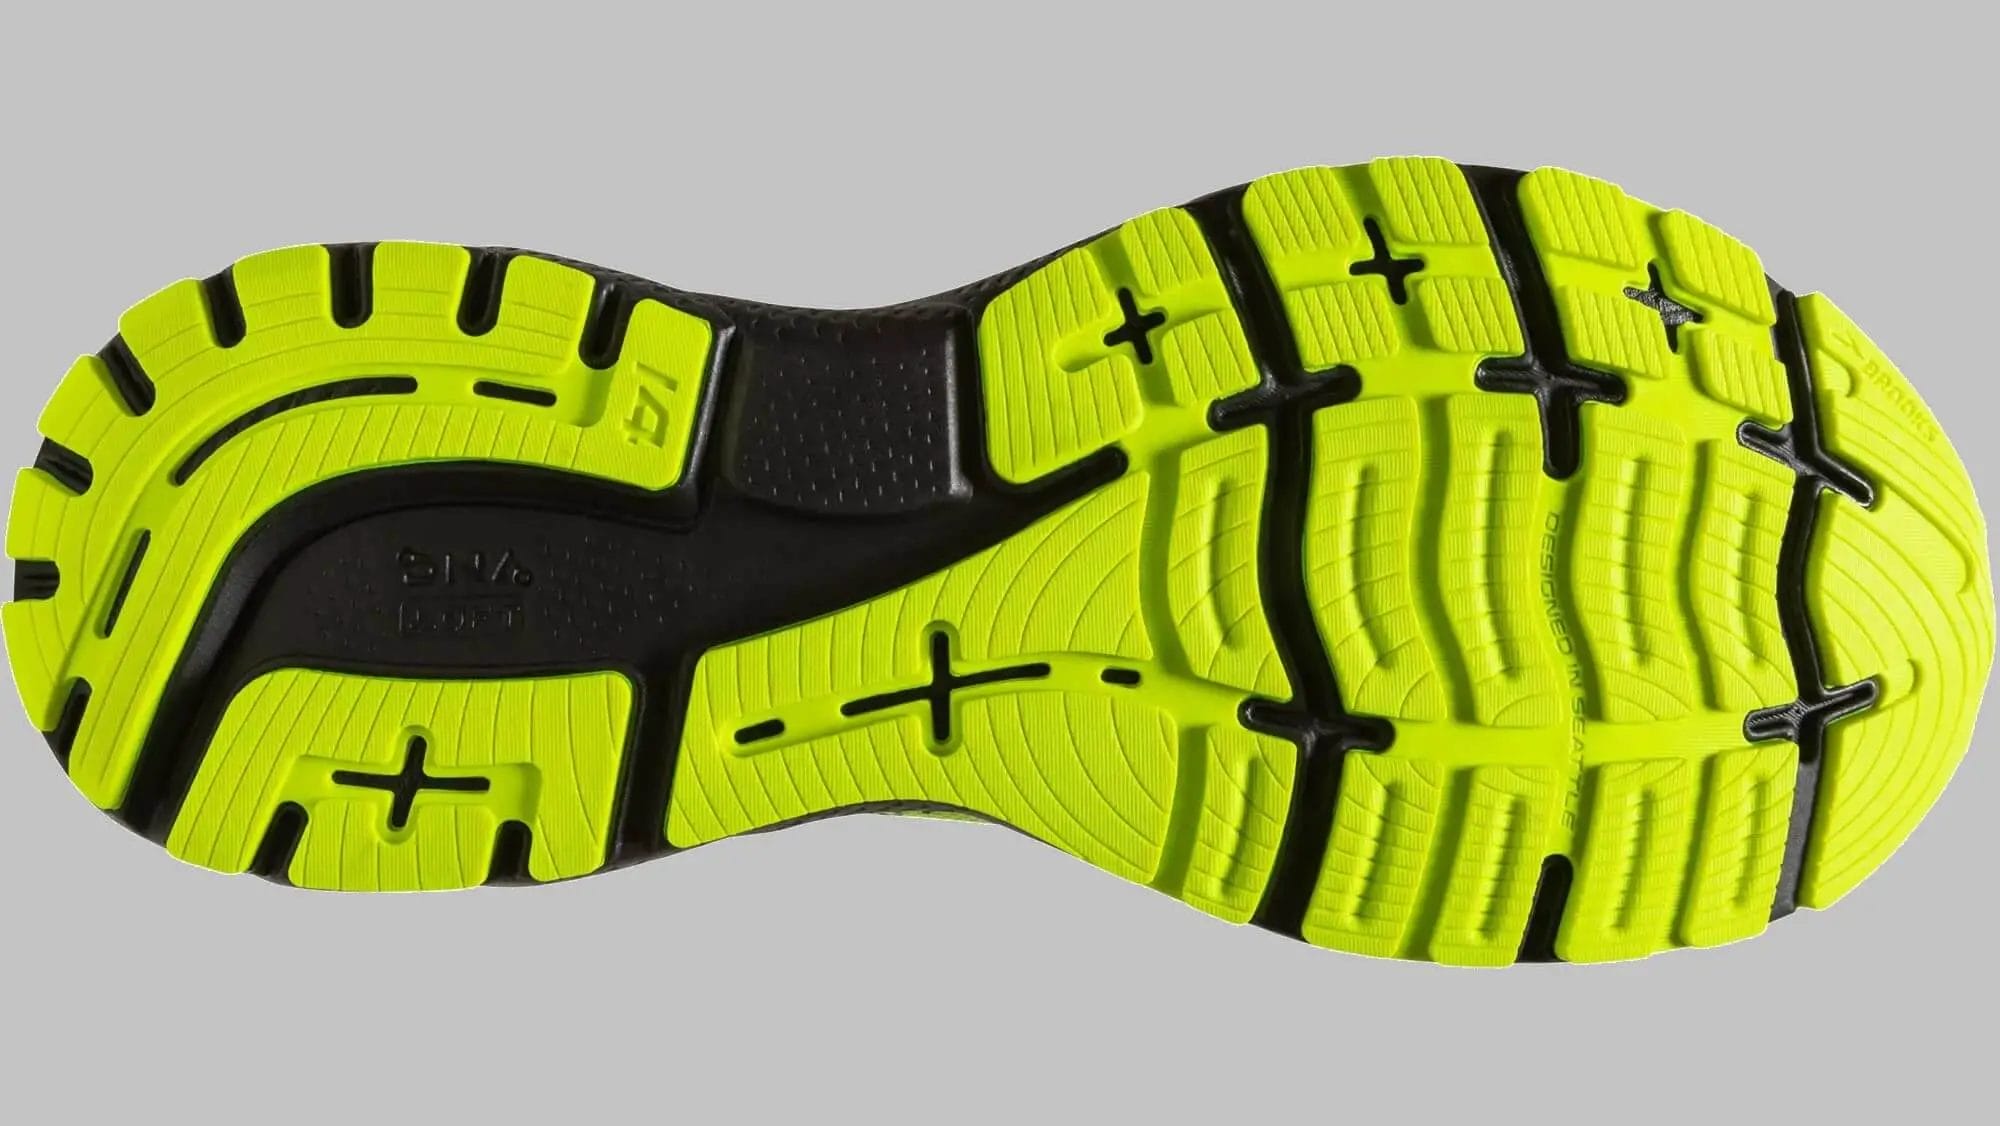 Outsole details on the latest model